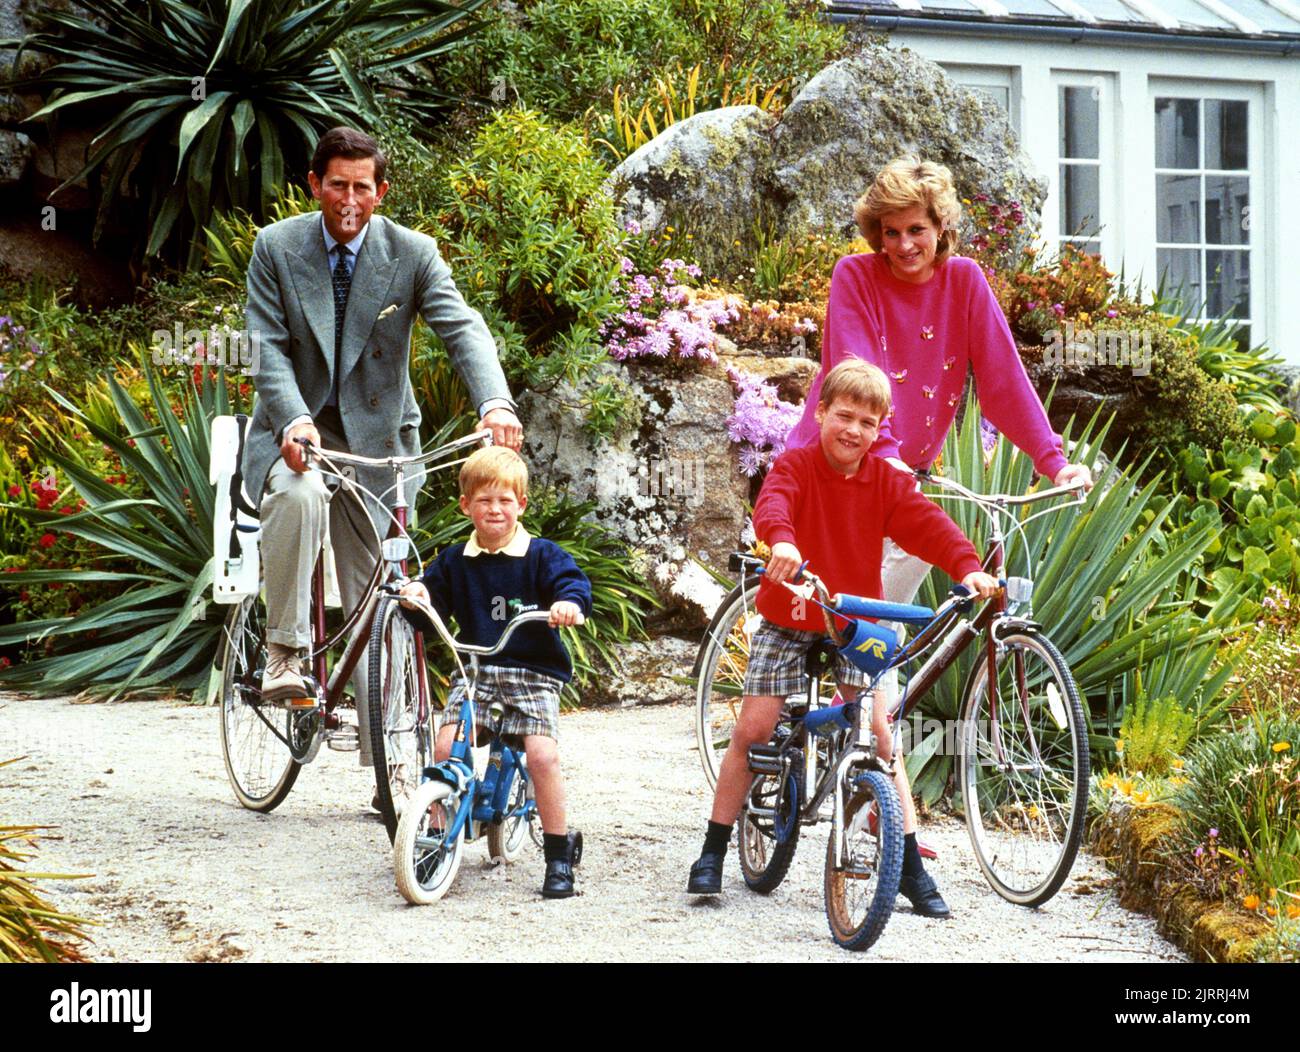 File photo dated 01/06/89 of the Prince and Princess of Wales with sons Prince William, and Prince Harry prepare for a cycling trip in Tresco during their holiday in the Scilly Isles. Diana, Princess of Wales, was killed on August 31 1997 in a car crash in the Pont de l'Alma tunnel in Paris. Issue date: Friday August 26, 2022. Stock Photo